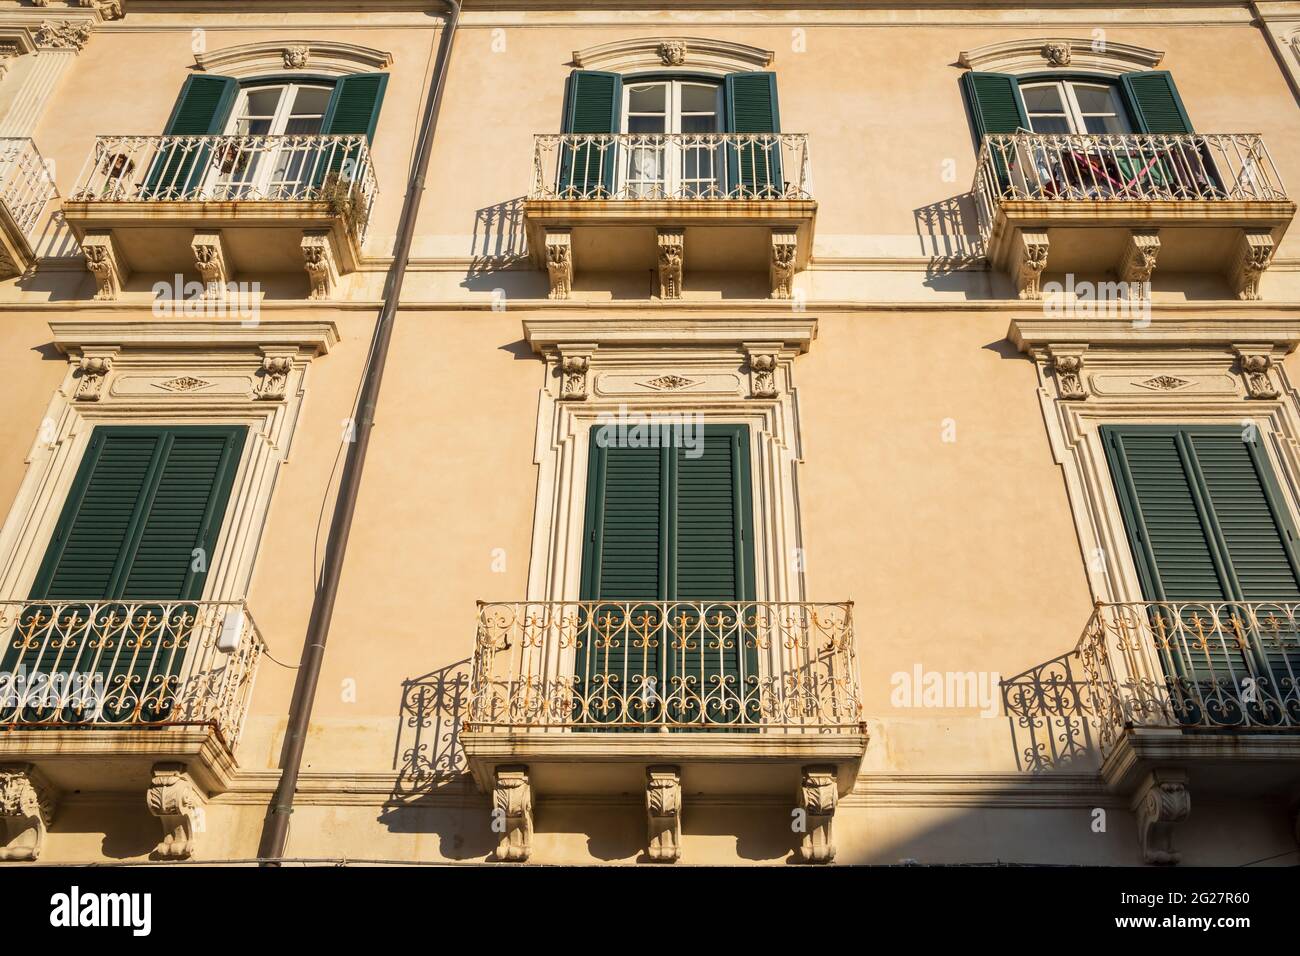 Building exterior with windows and balconies in Sicily, Italy Stock Photo -  Alamy